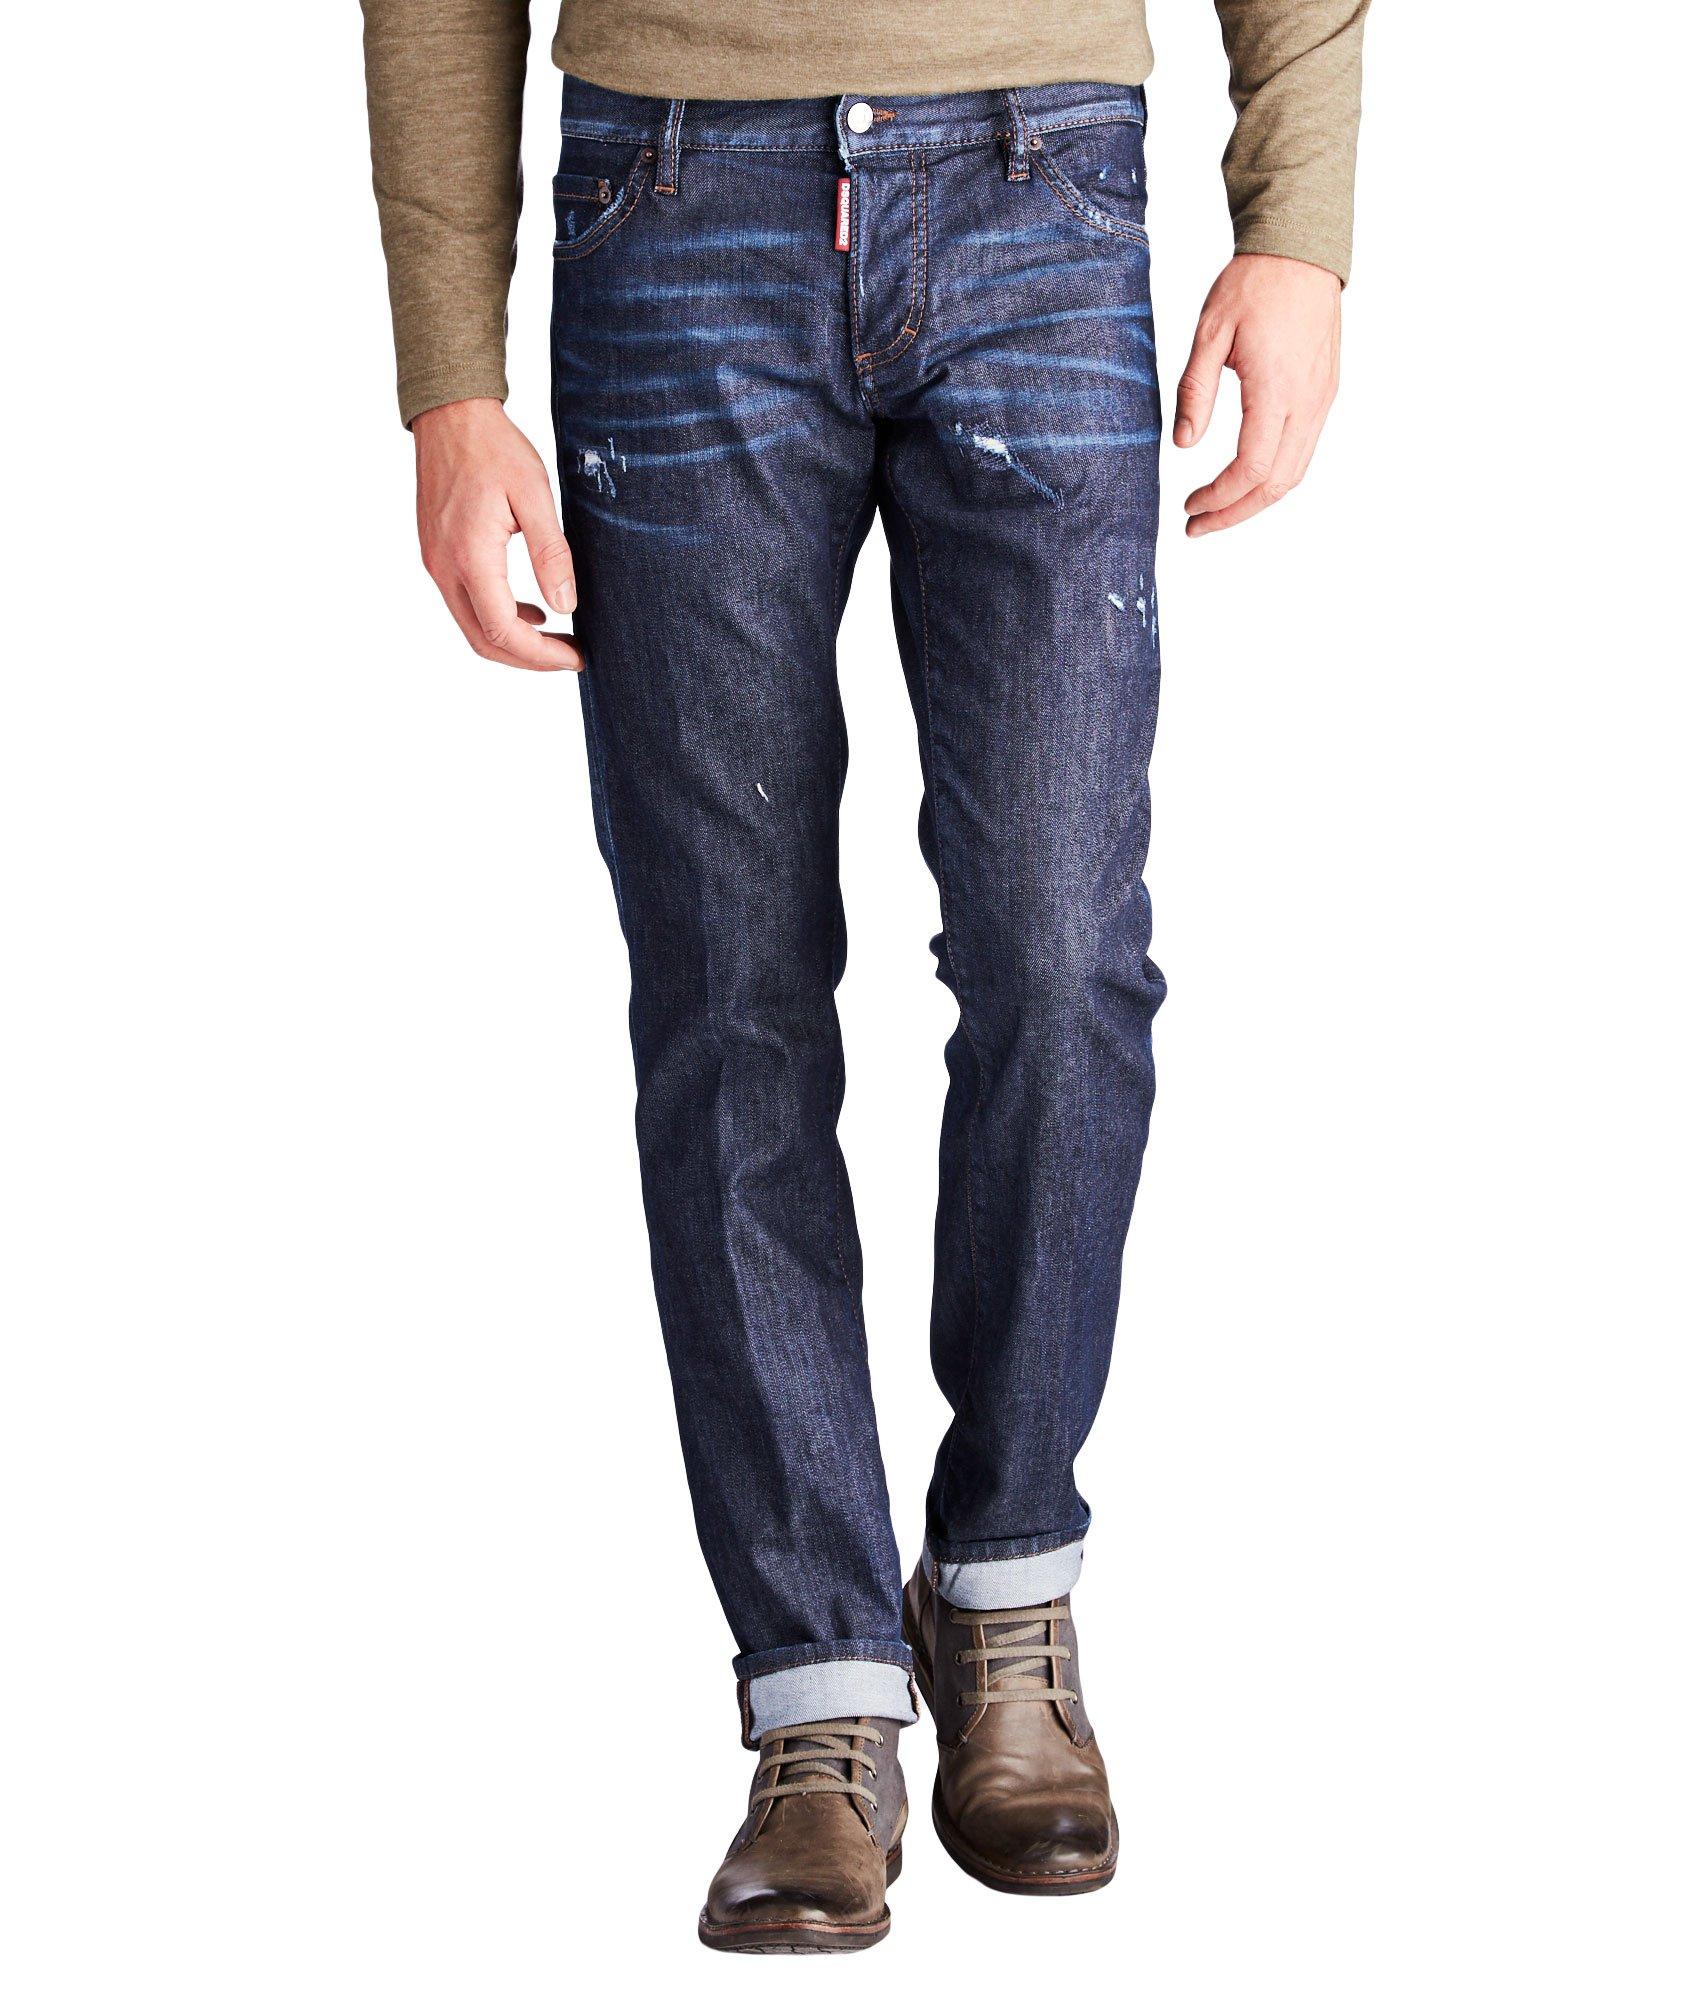 Skinny Fit Jeans image 0